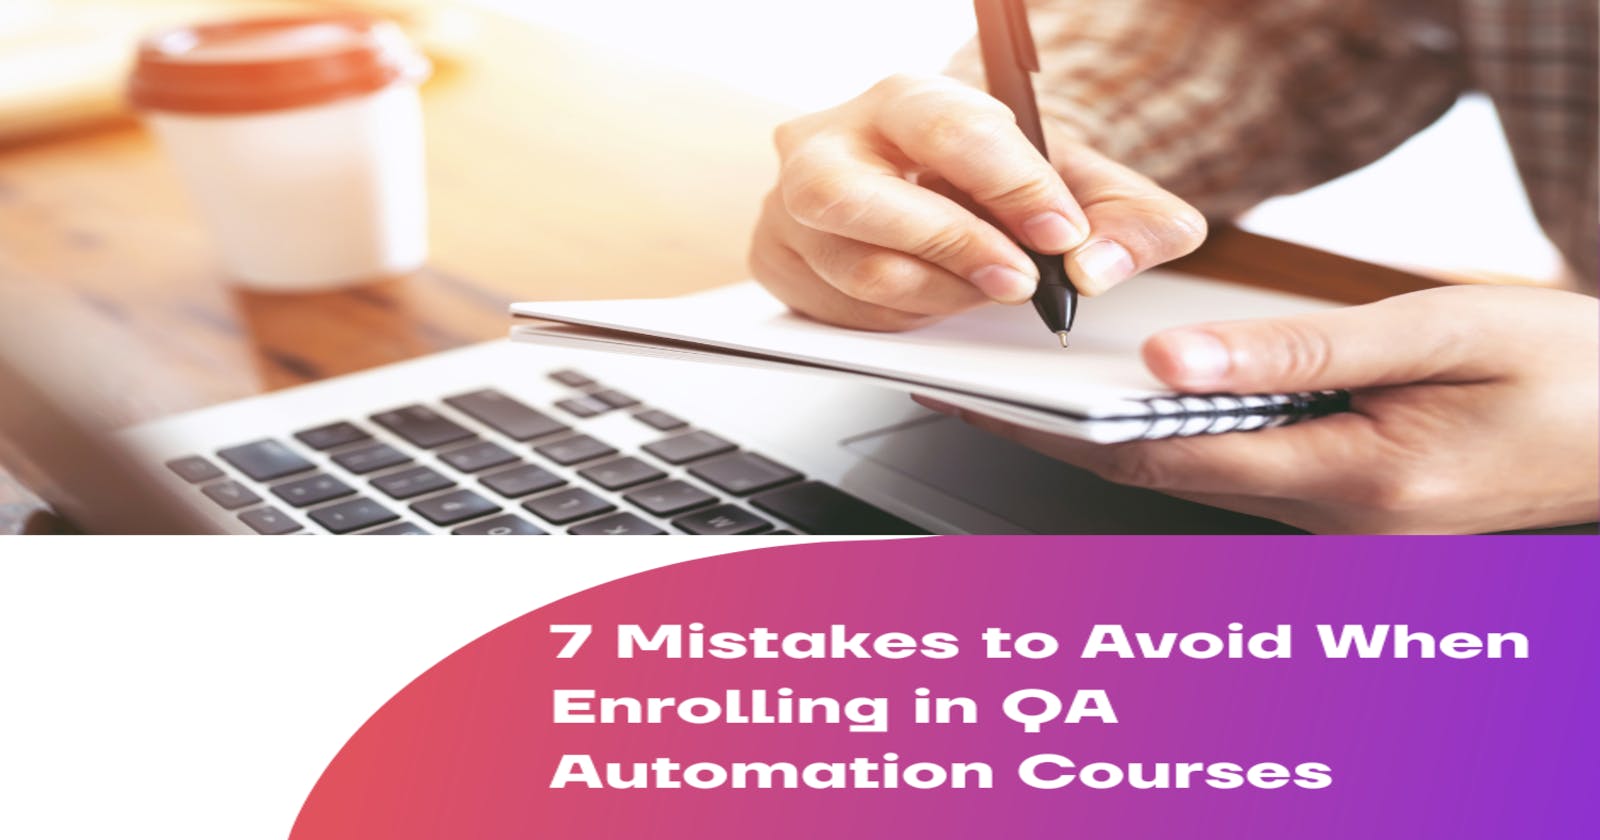 7 Mistakes to Avoid When Enrolling in QA Automation Courses